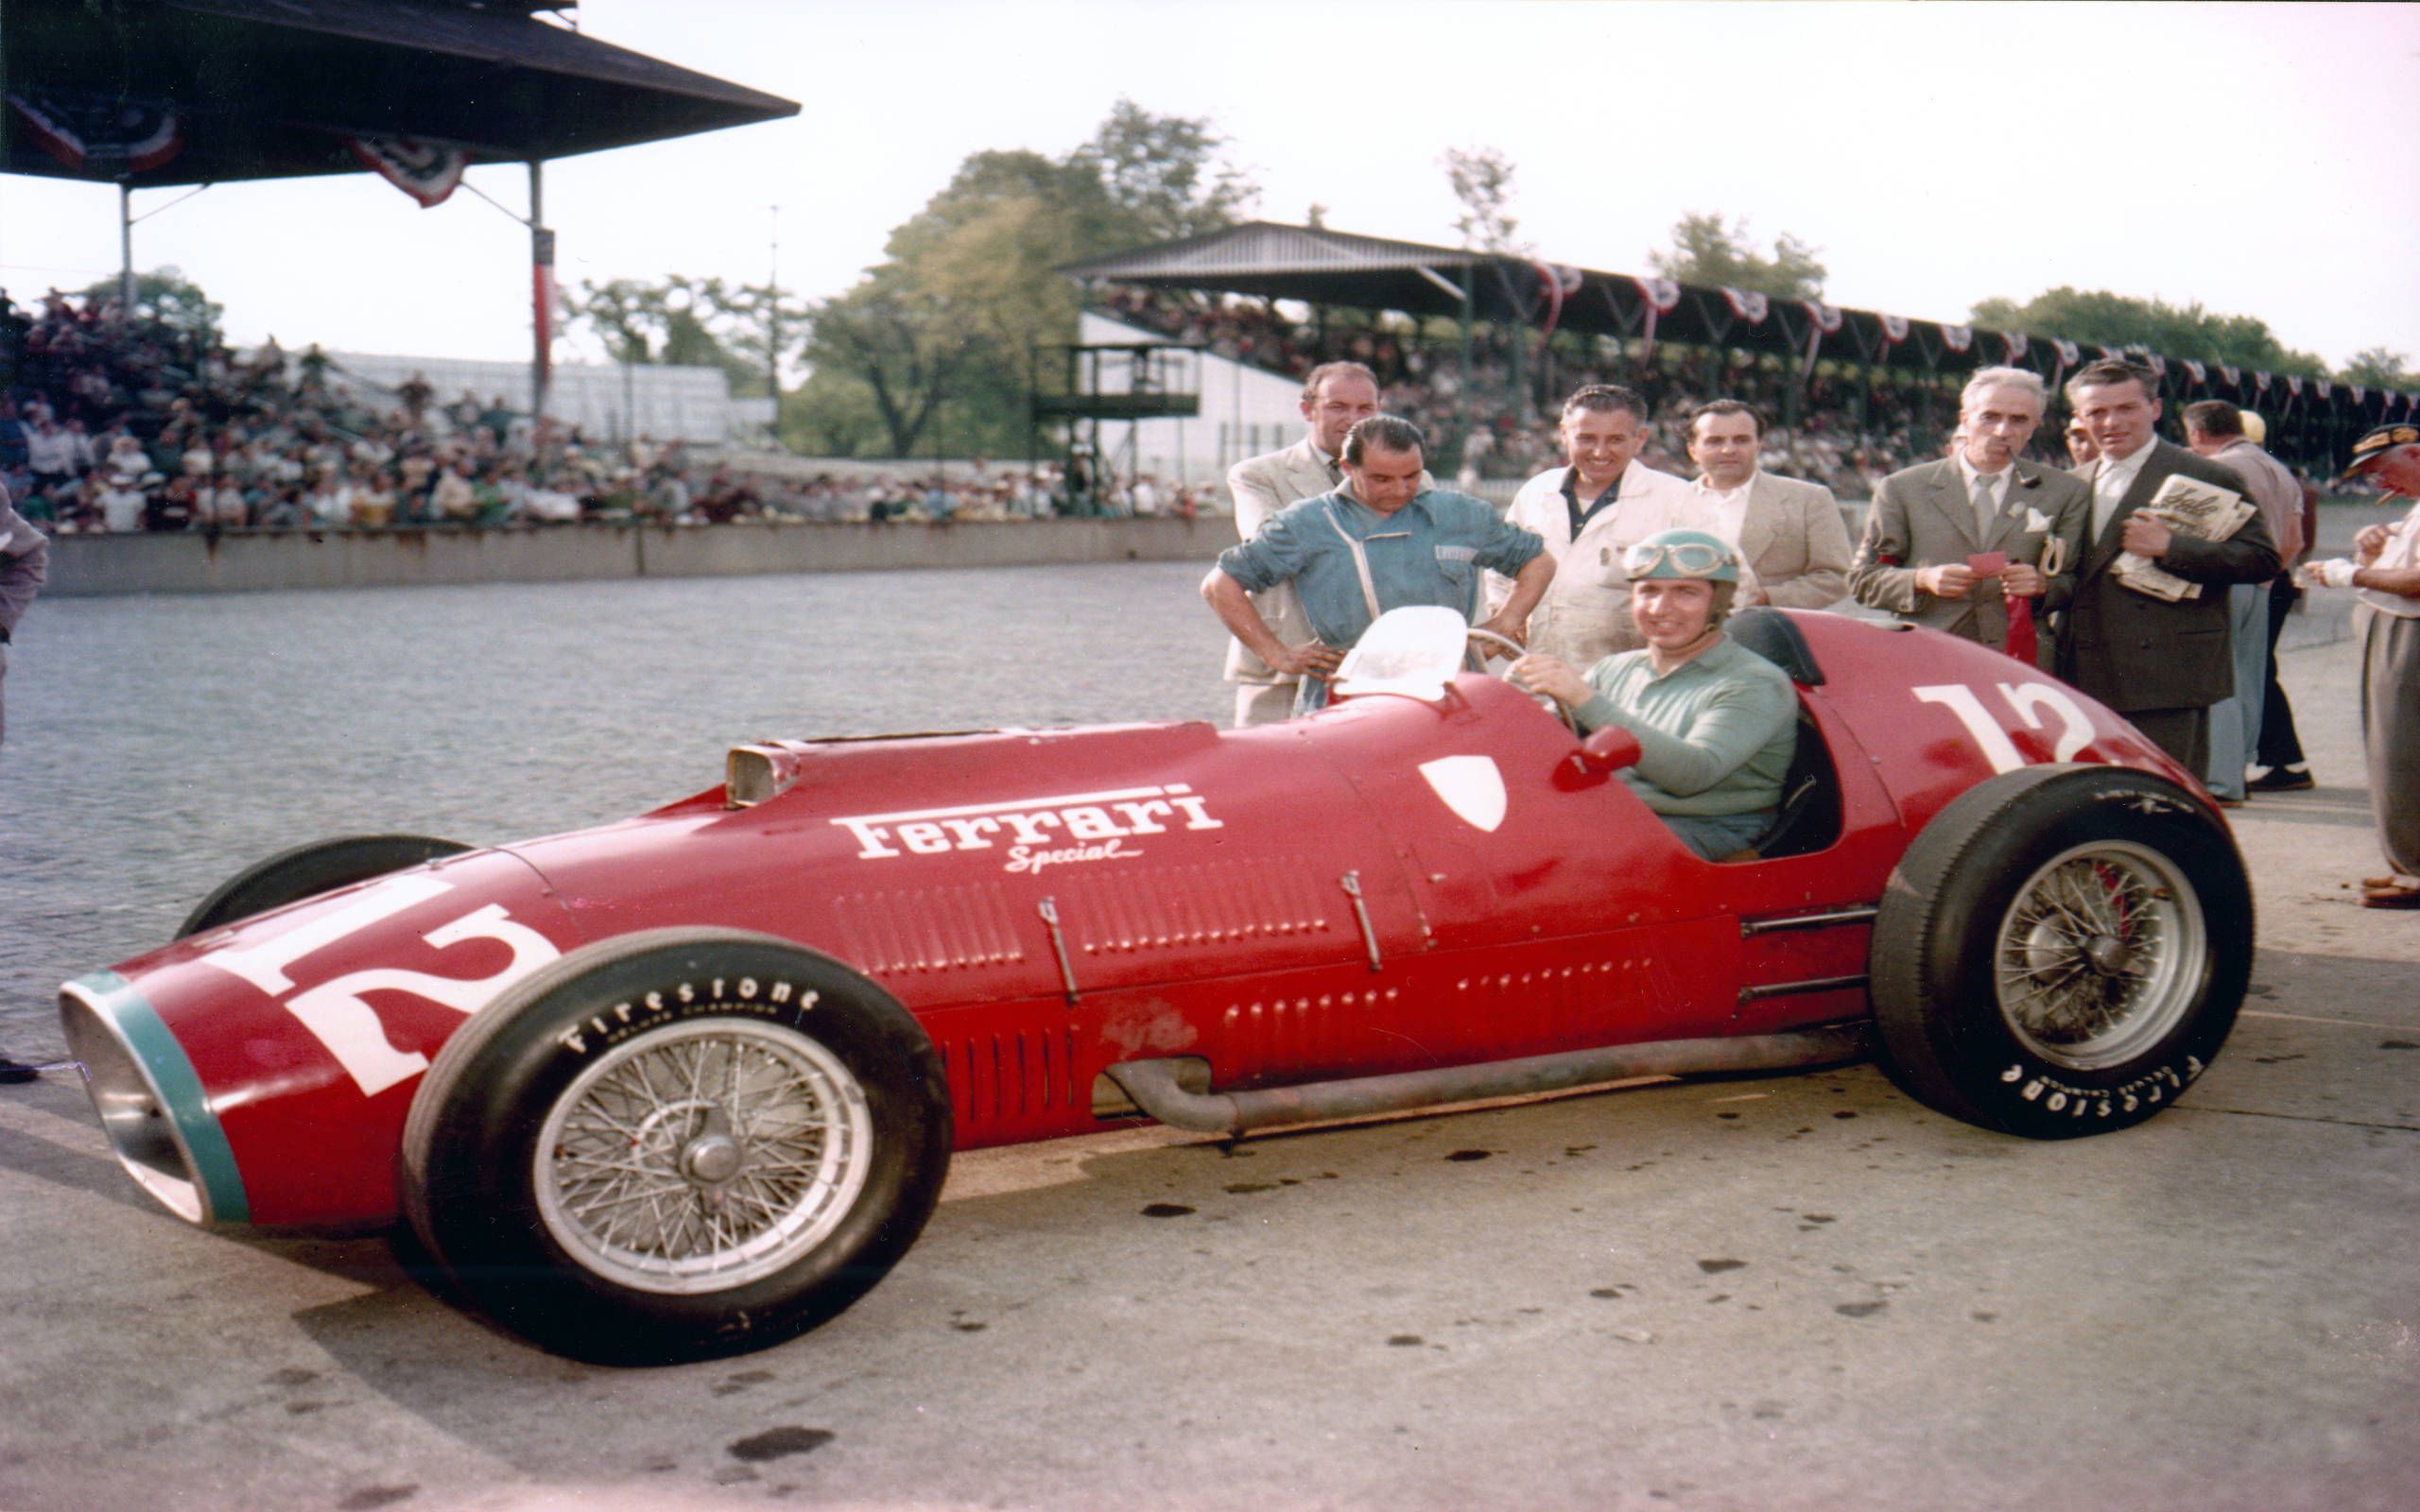 1952 Indy 500 - Alberto Ascari drove the Ferrari 37 in the Indy 500, the only time a Ferrari ever raced in the 500